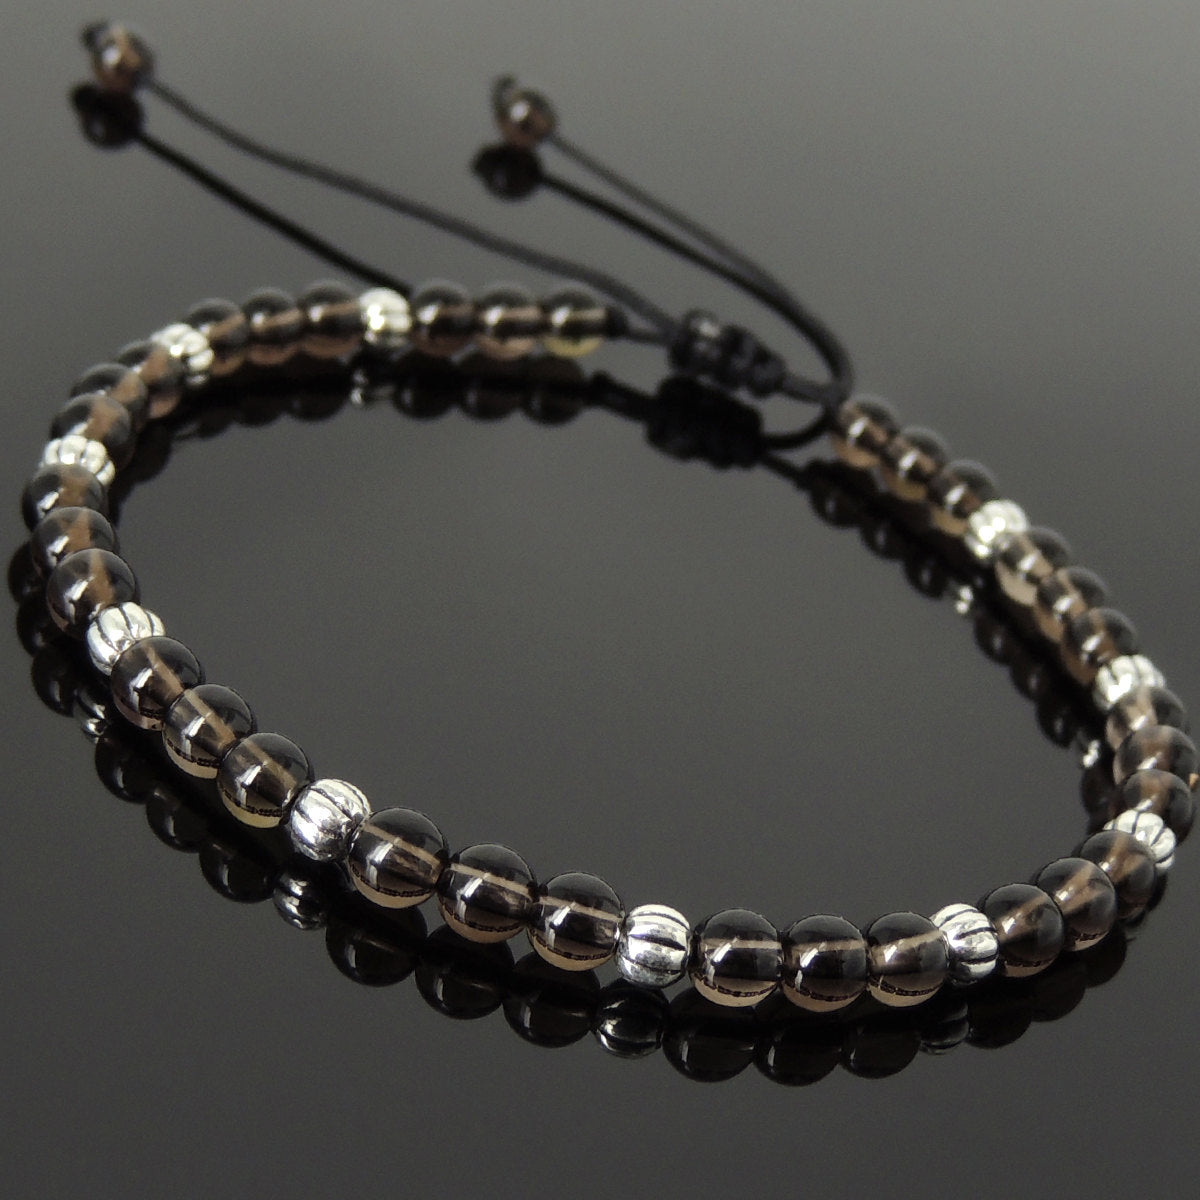 4mm Smoky Quartz Adjustable Braided Healing Bracelet with S925 Sterling Silver Artisan Beads - Handmade by Gem & Silver BR1056